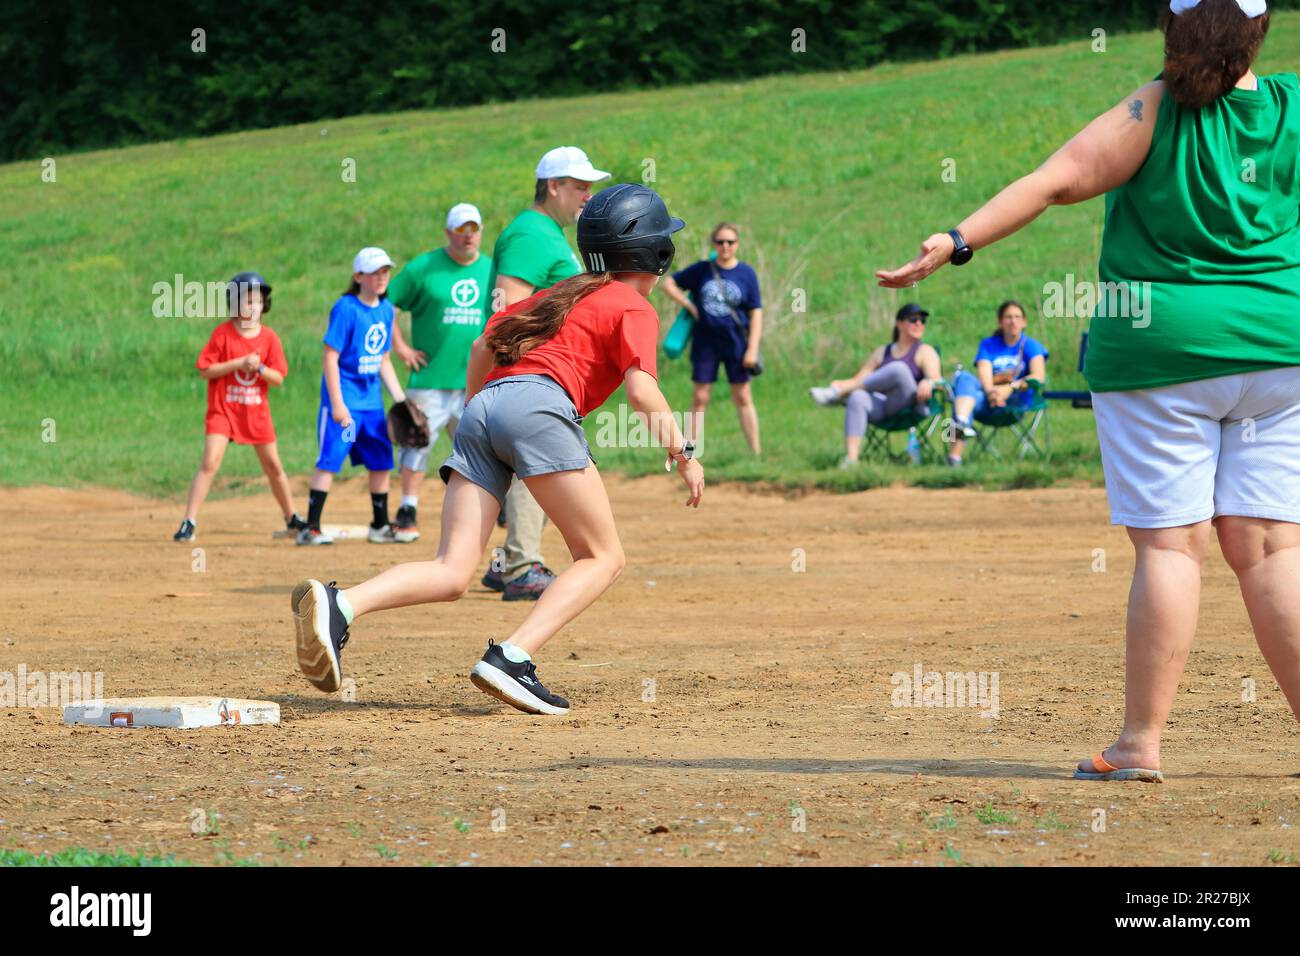 Preteen girls running towards home plate during a softball game Stock Photo